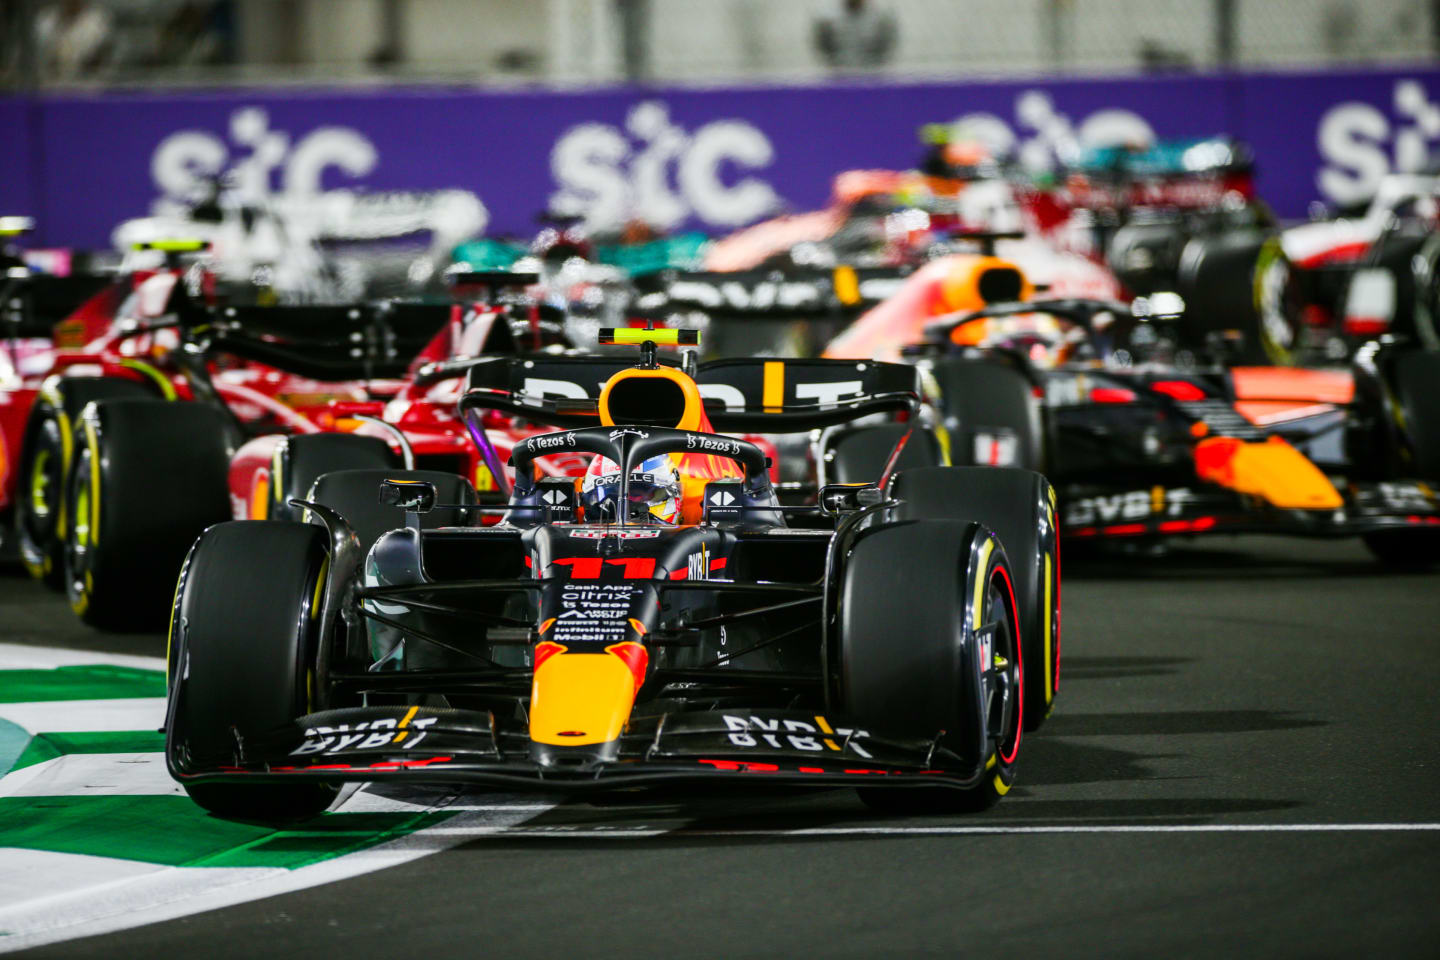 JEDDAH, SAUDI ARABIA - MARCH 27: Sergio Perez of Mexico and Red Bull Racing leads into the first